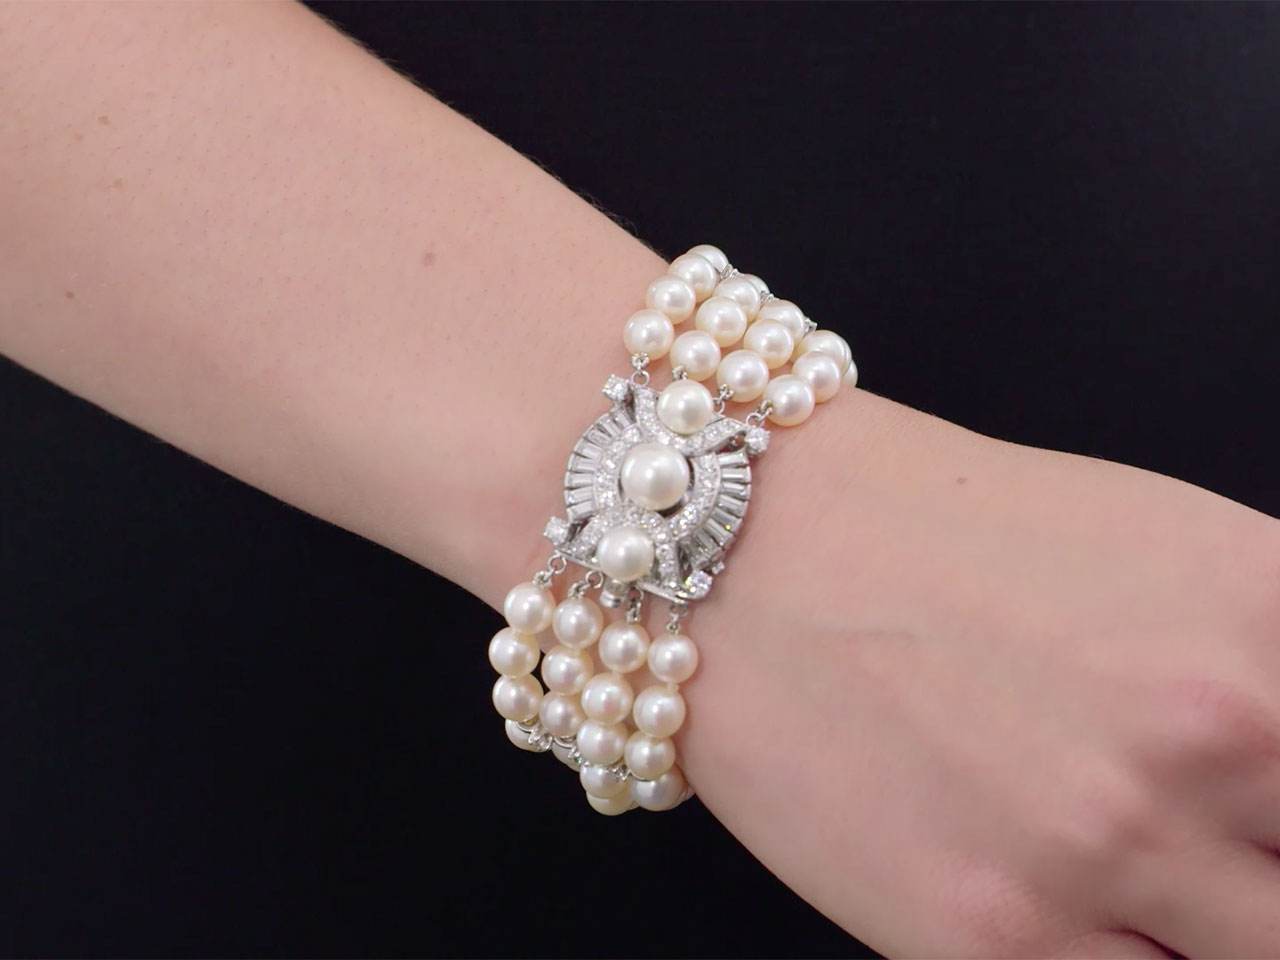 Four Strand Cultured Pearl and Diamond Bracelet in Platinum